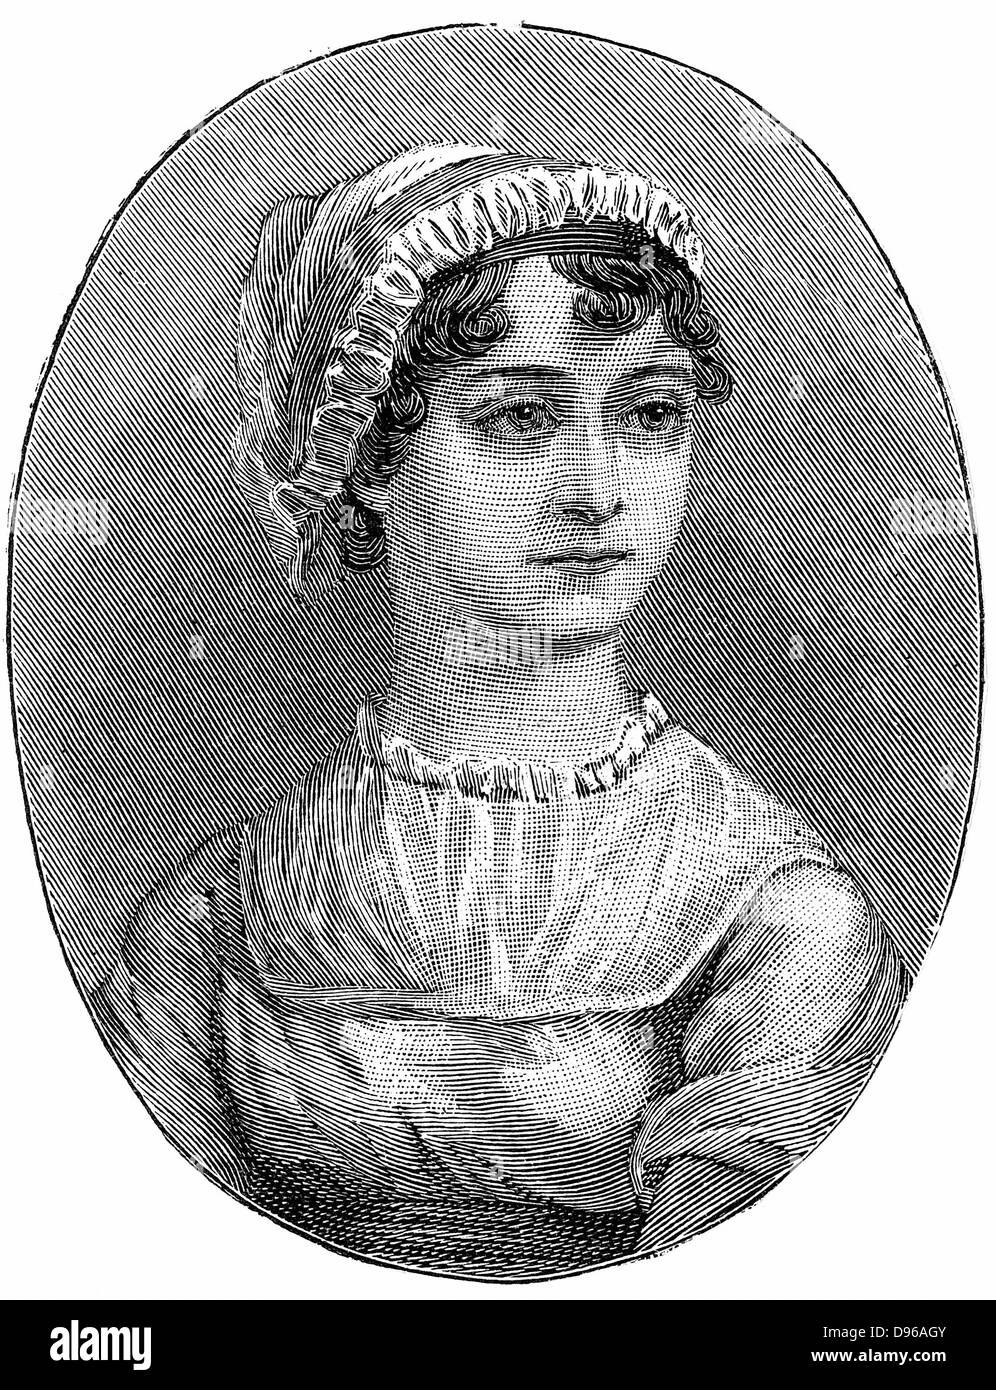 Jane Austen (1775-1817) English novelist remembered for her six great novels 'Sense and Sensibility', 'Pride and Prejudice', 'Mansfield Park', 'Emma', 'Persuasion', and 'Northanger Abbey'. Engraving. Stock Photo